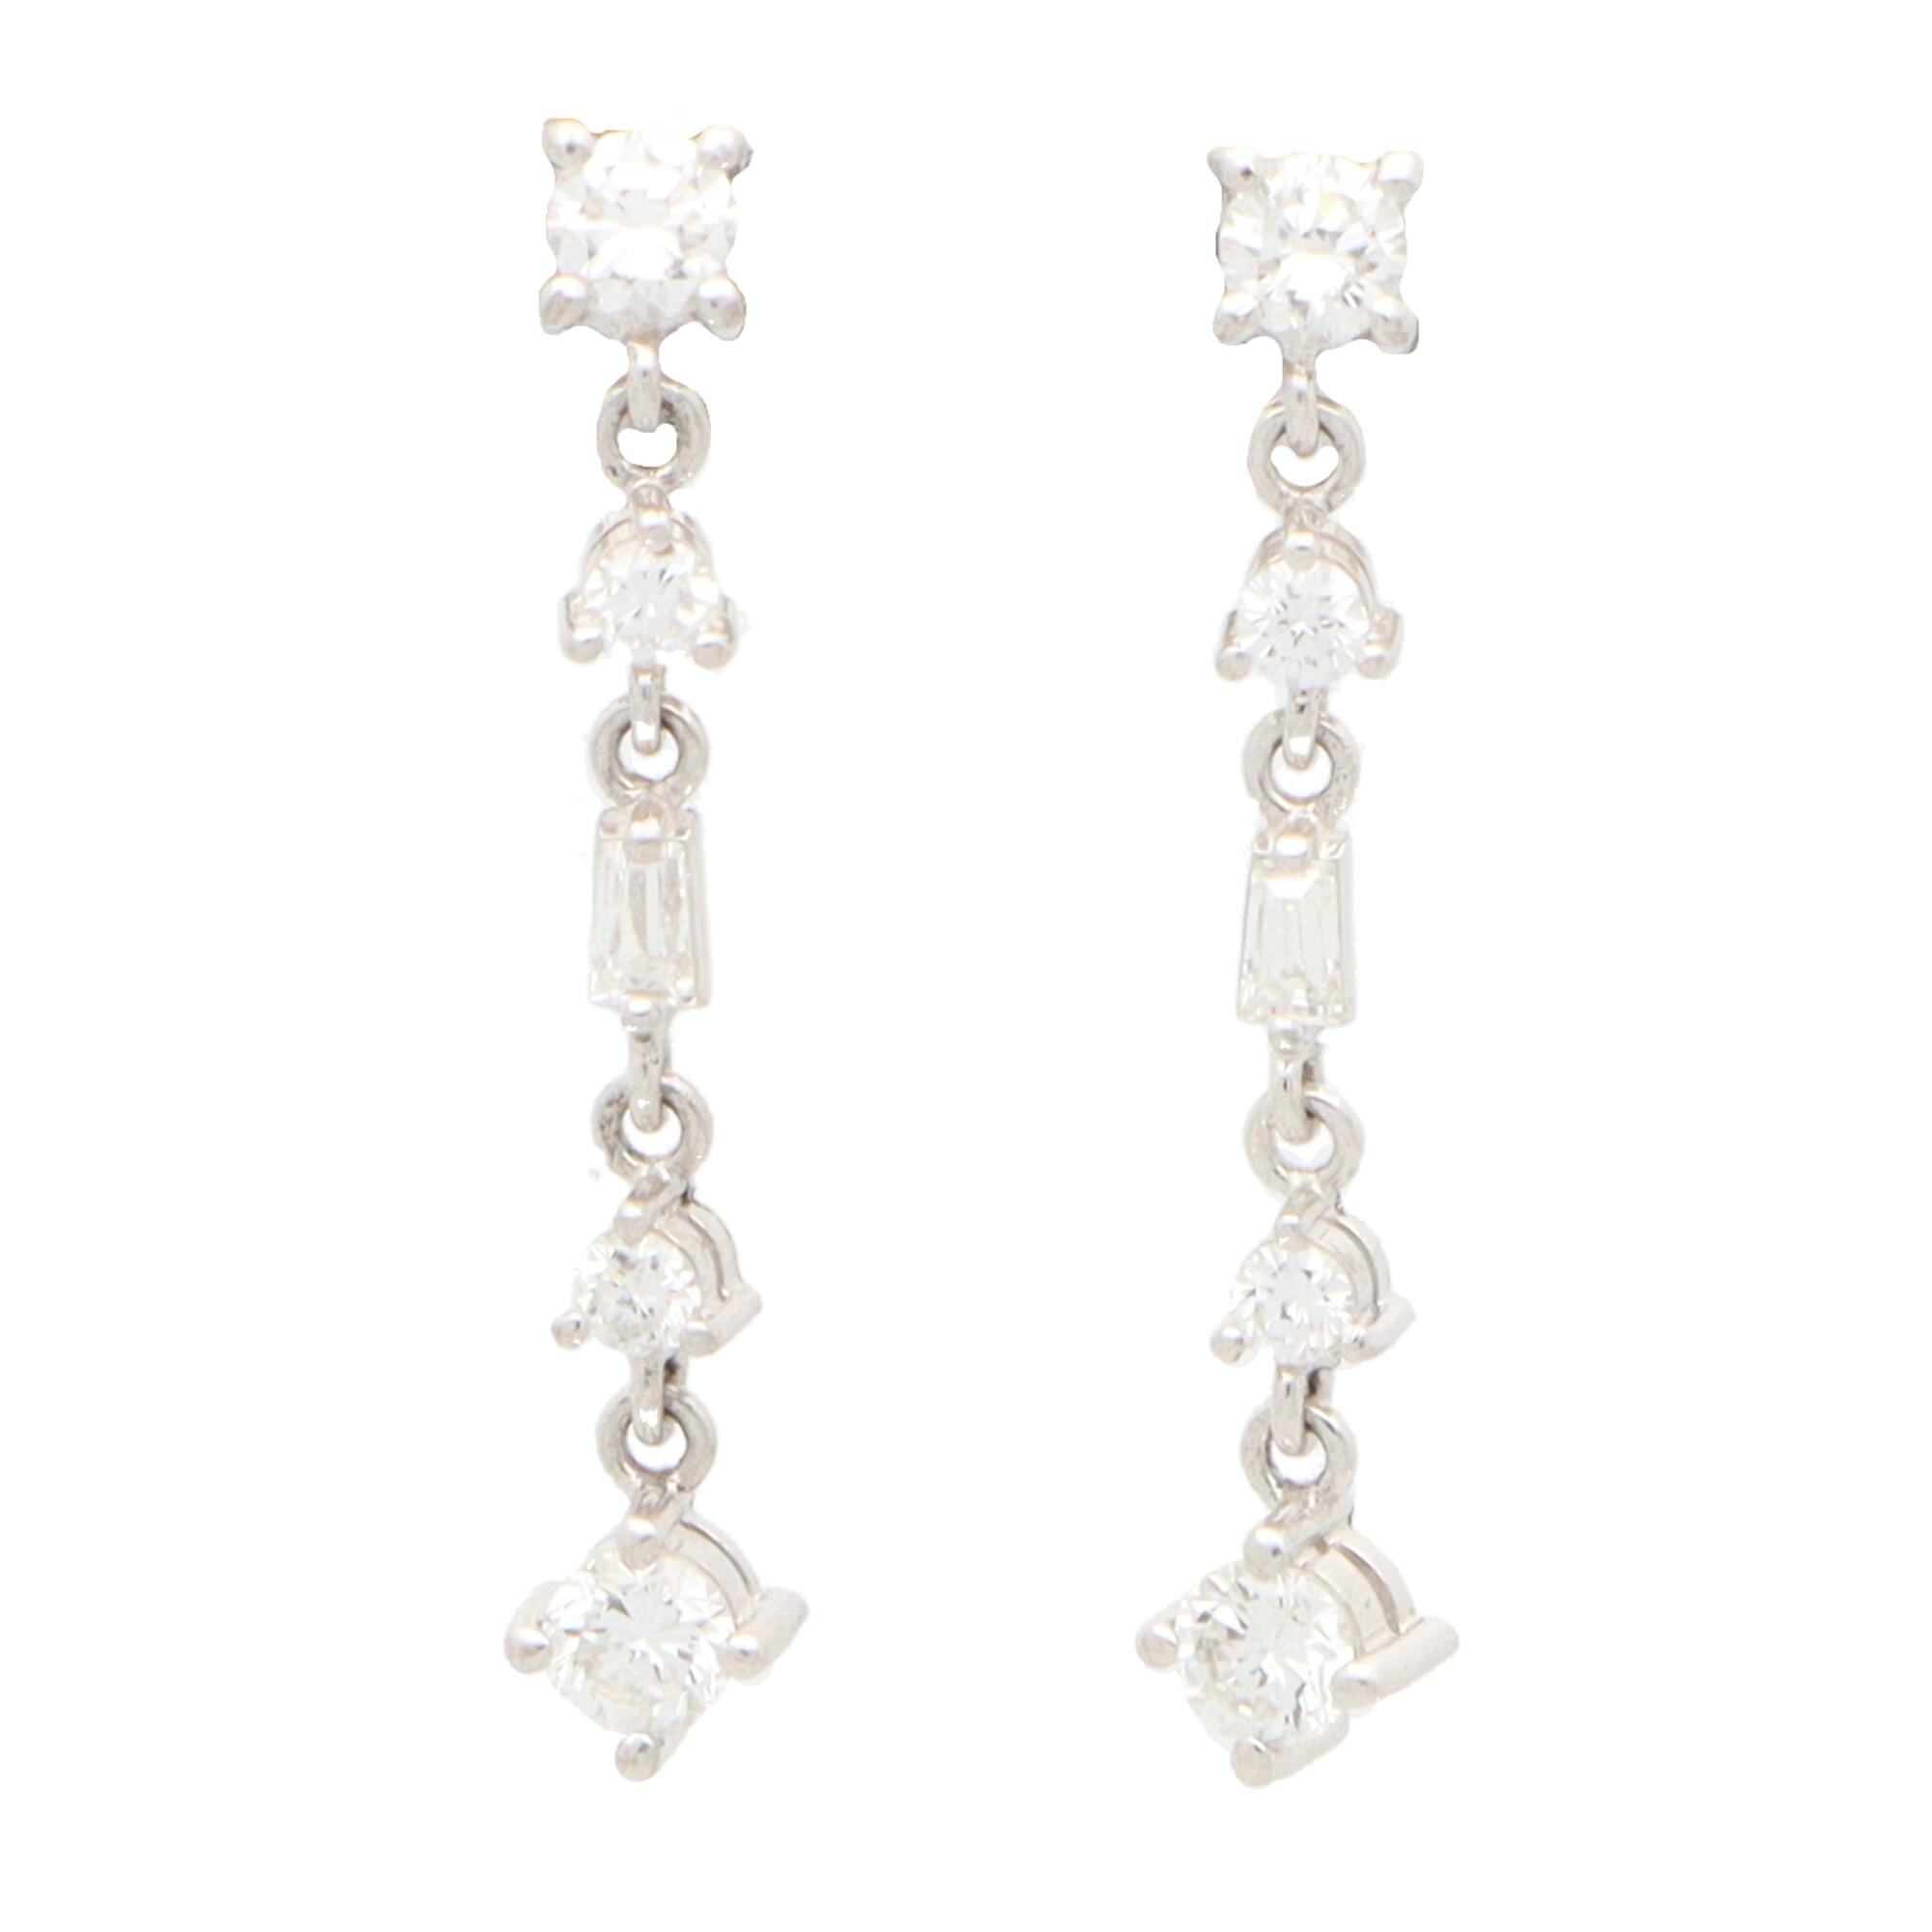 Contemporary Style Diamond Drop Earrings Set in 14k White Gold